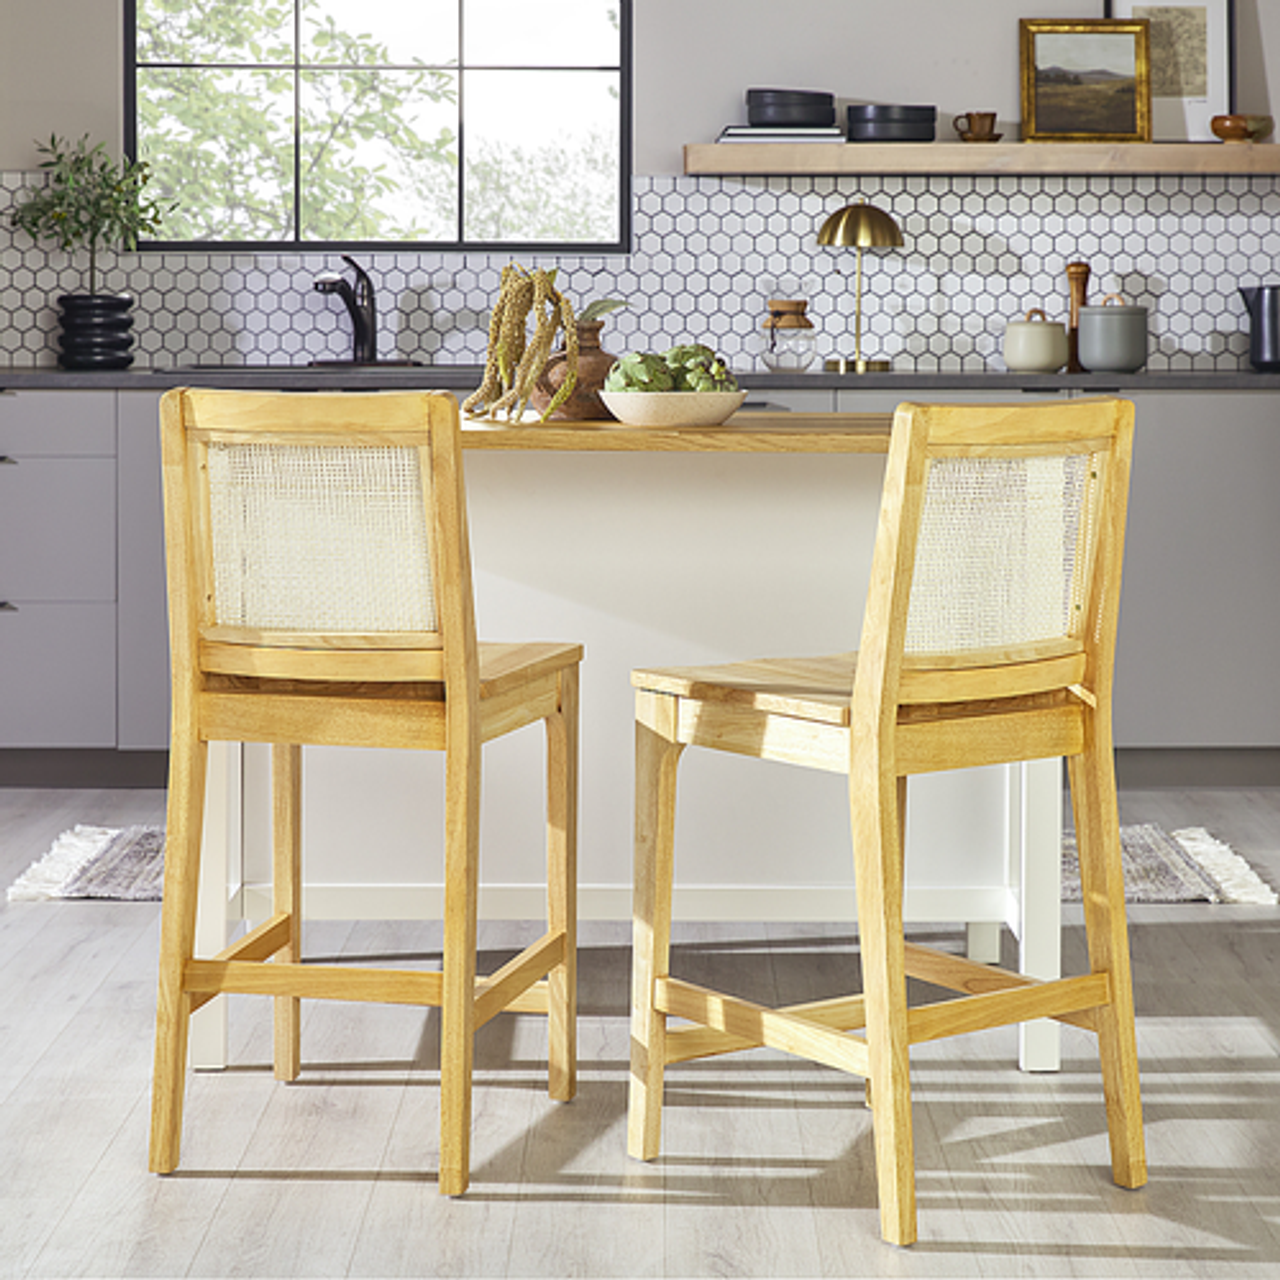 Walker Edison - Boho Solid Wood Counter Stool with Rattan Back Inset (2-Piece Set) - Natural